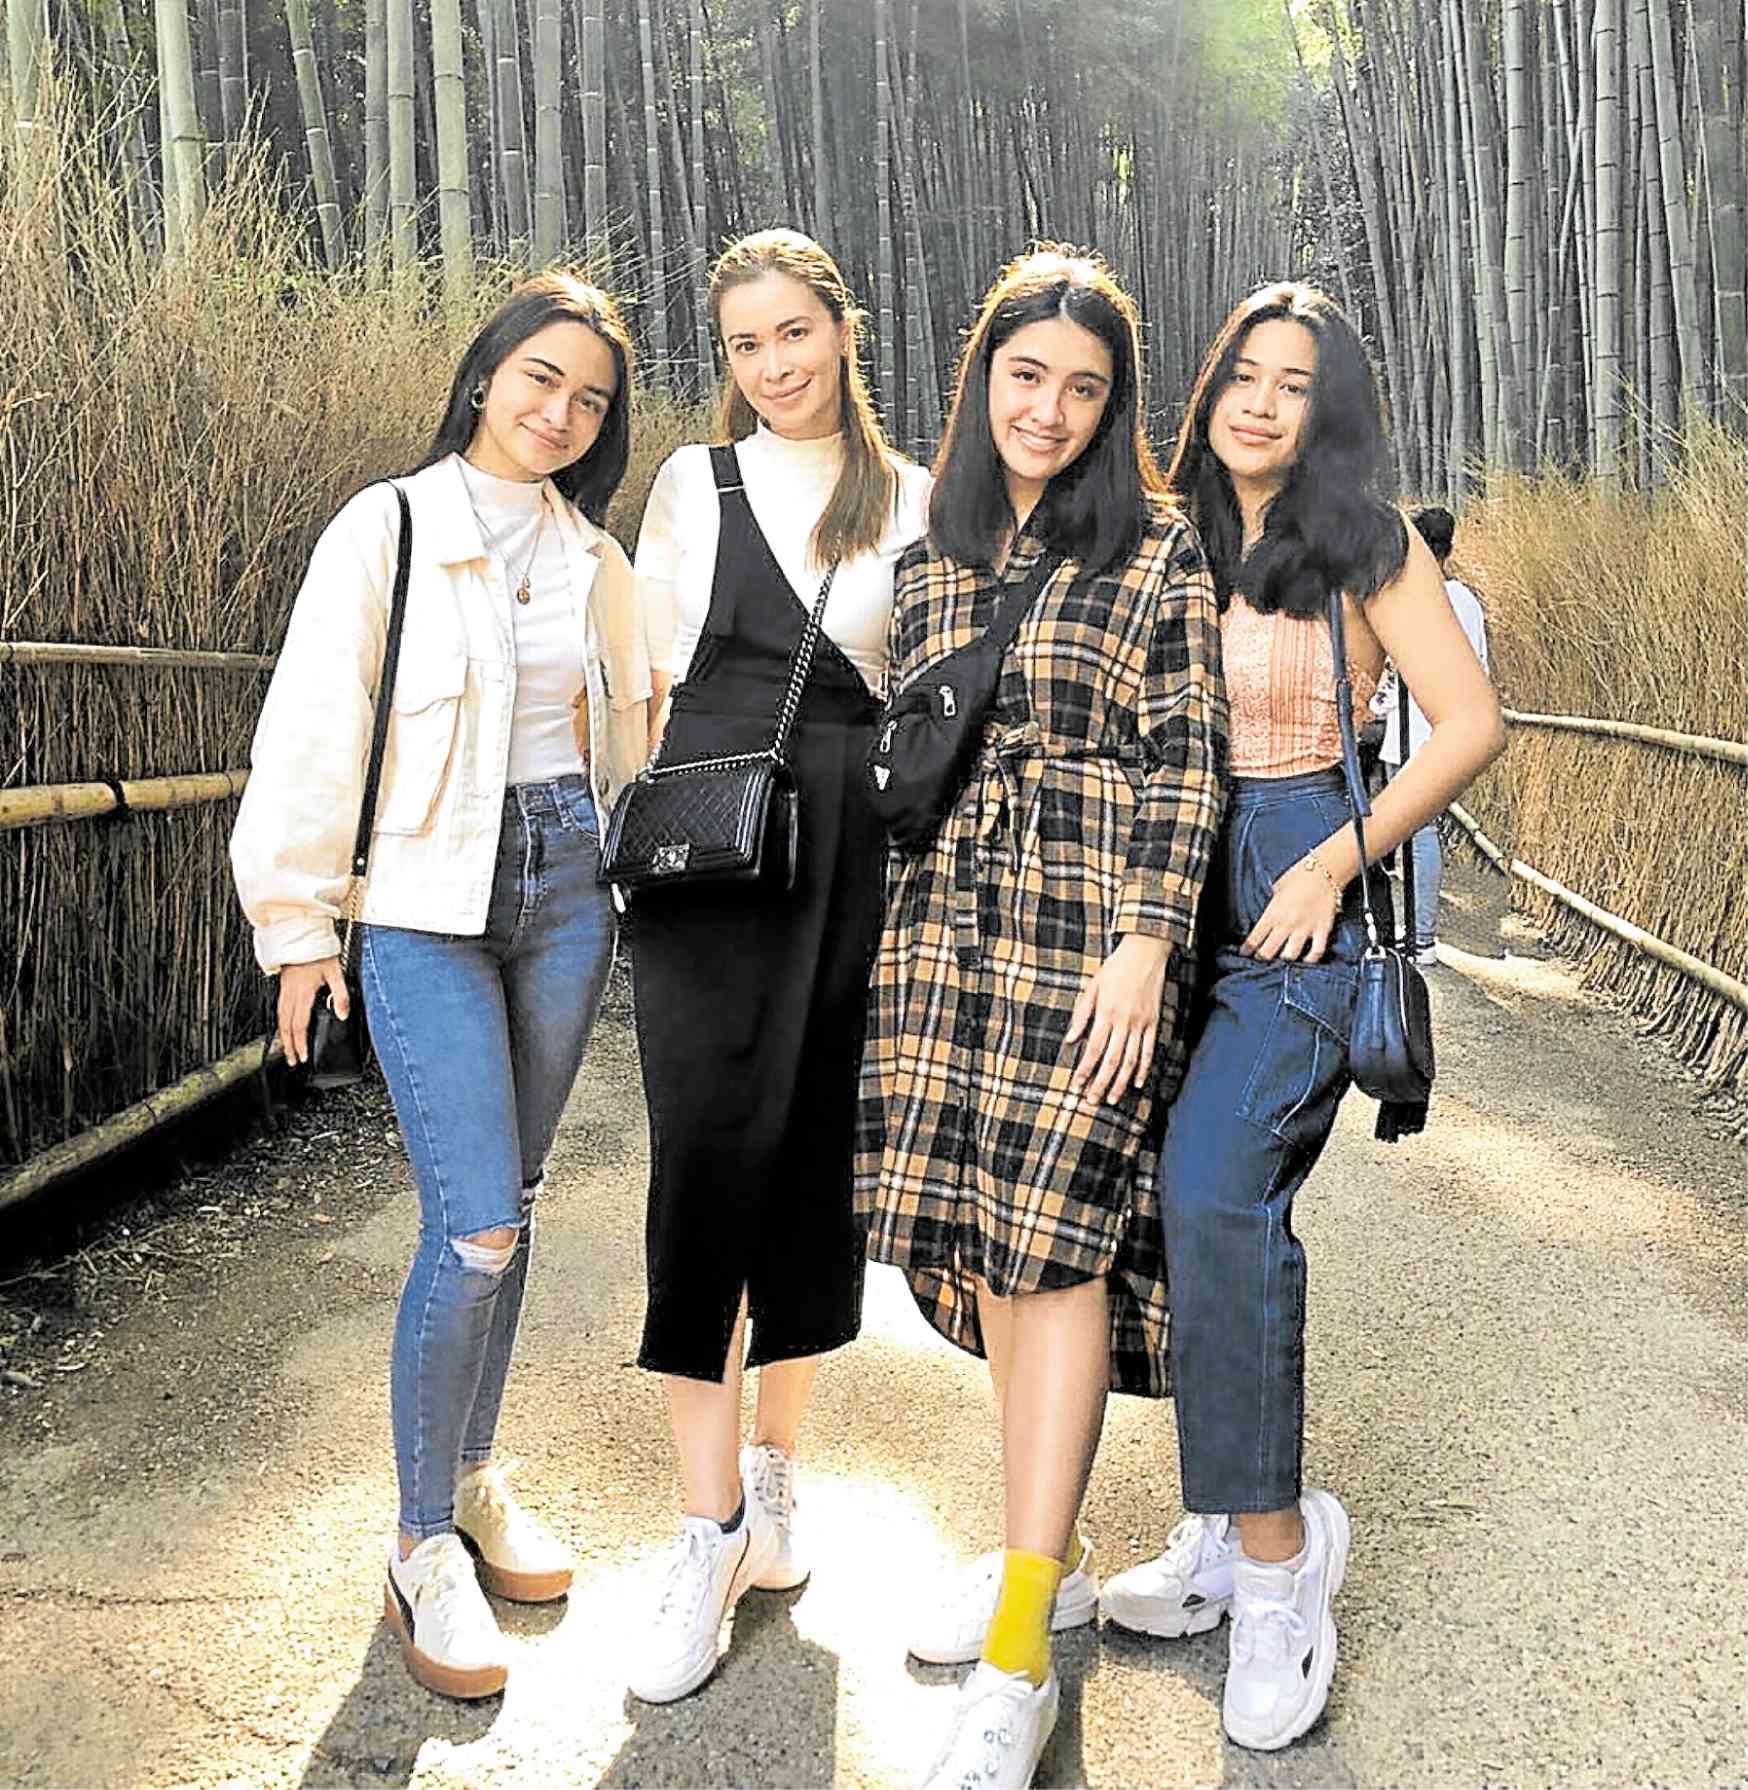 Sunshine Cruz (second from left) with daughters Angelina, Samantha and Cheska